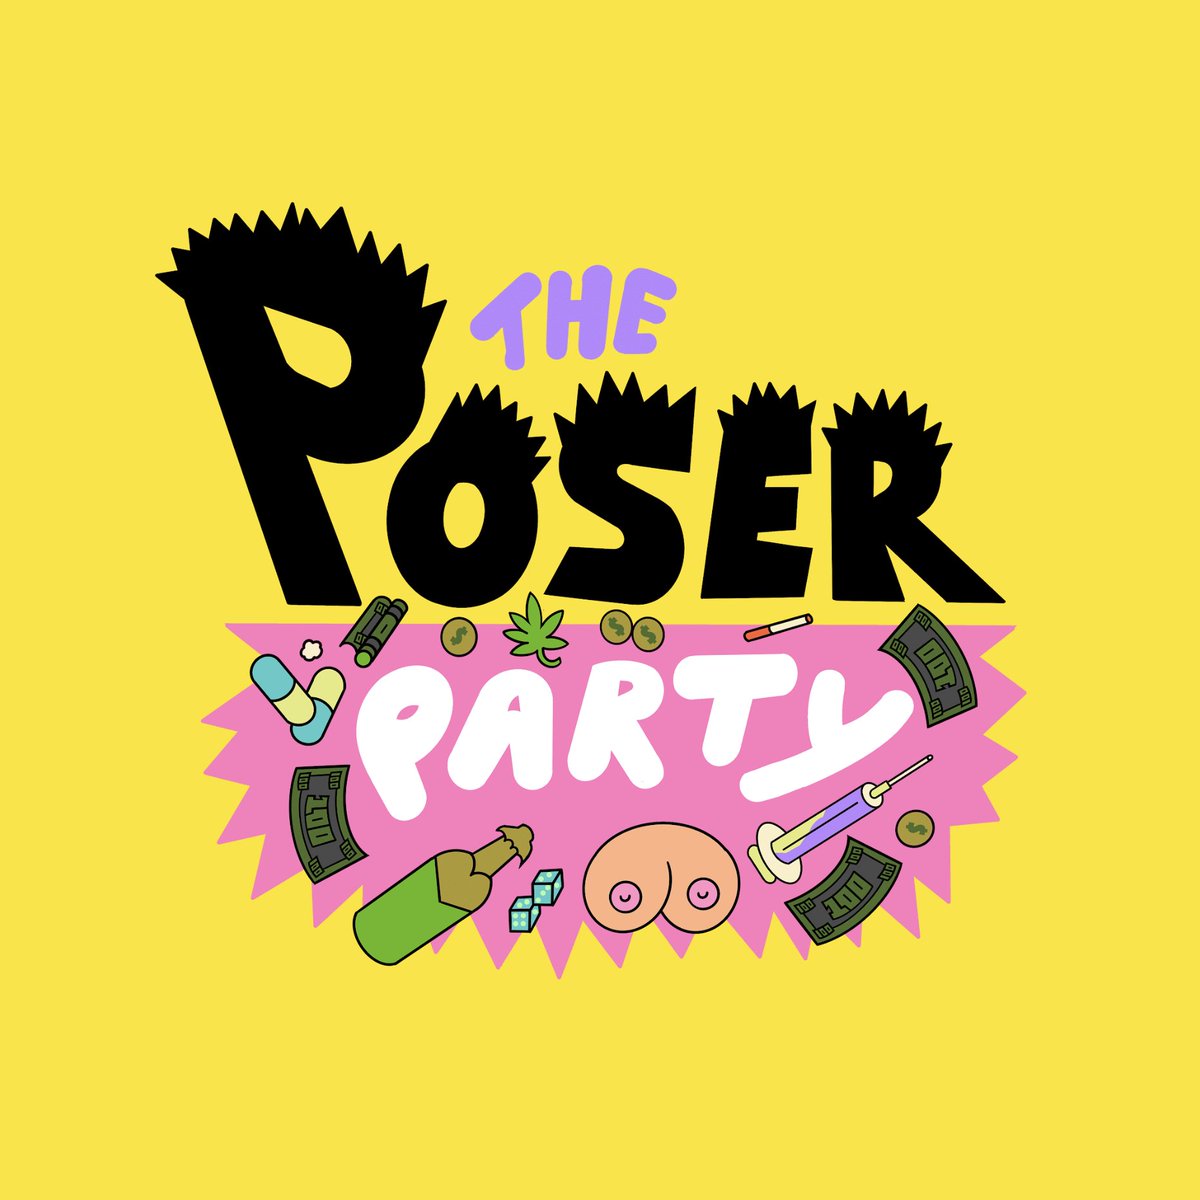 GM! It's party time mfers🎉 We are raffling off x1 @theposerparty NFT on our raffle site 🚀 1000 tickets // 500 $NIBBLES per ticket. Raffle is running for 24hrs⏳ dfwf-raffles.vercel.app/raffles/4AAUEW…